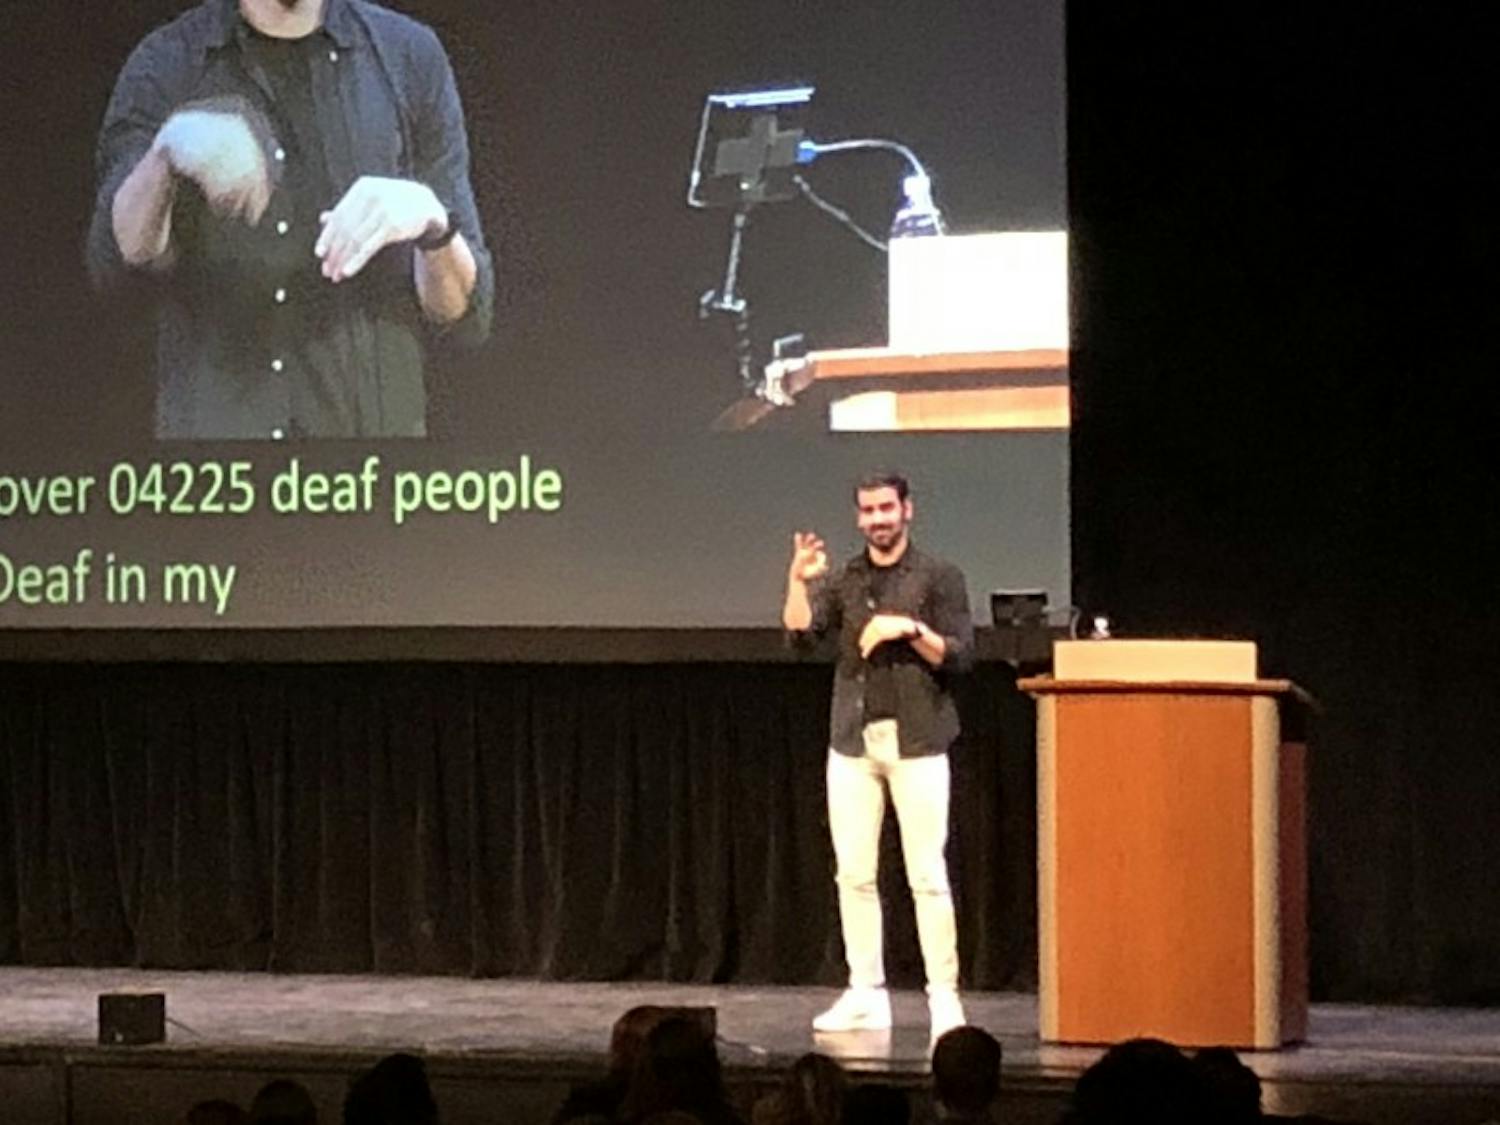 DiMarco described his first encounters using sign language with both the hearing and deaf communities at his lecture as part of the Wisconsin Union Directorate's Distinguished Lecture Series.